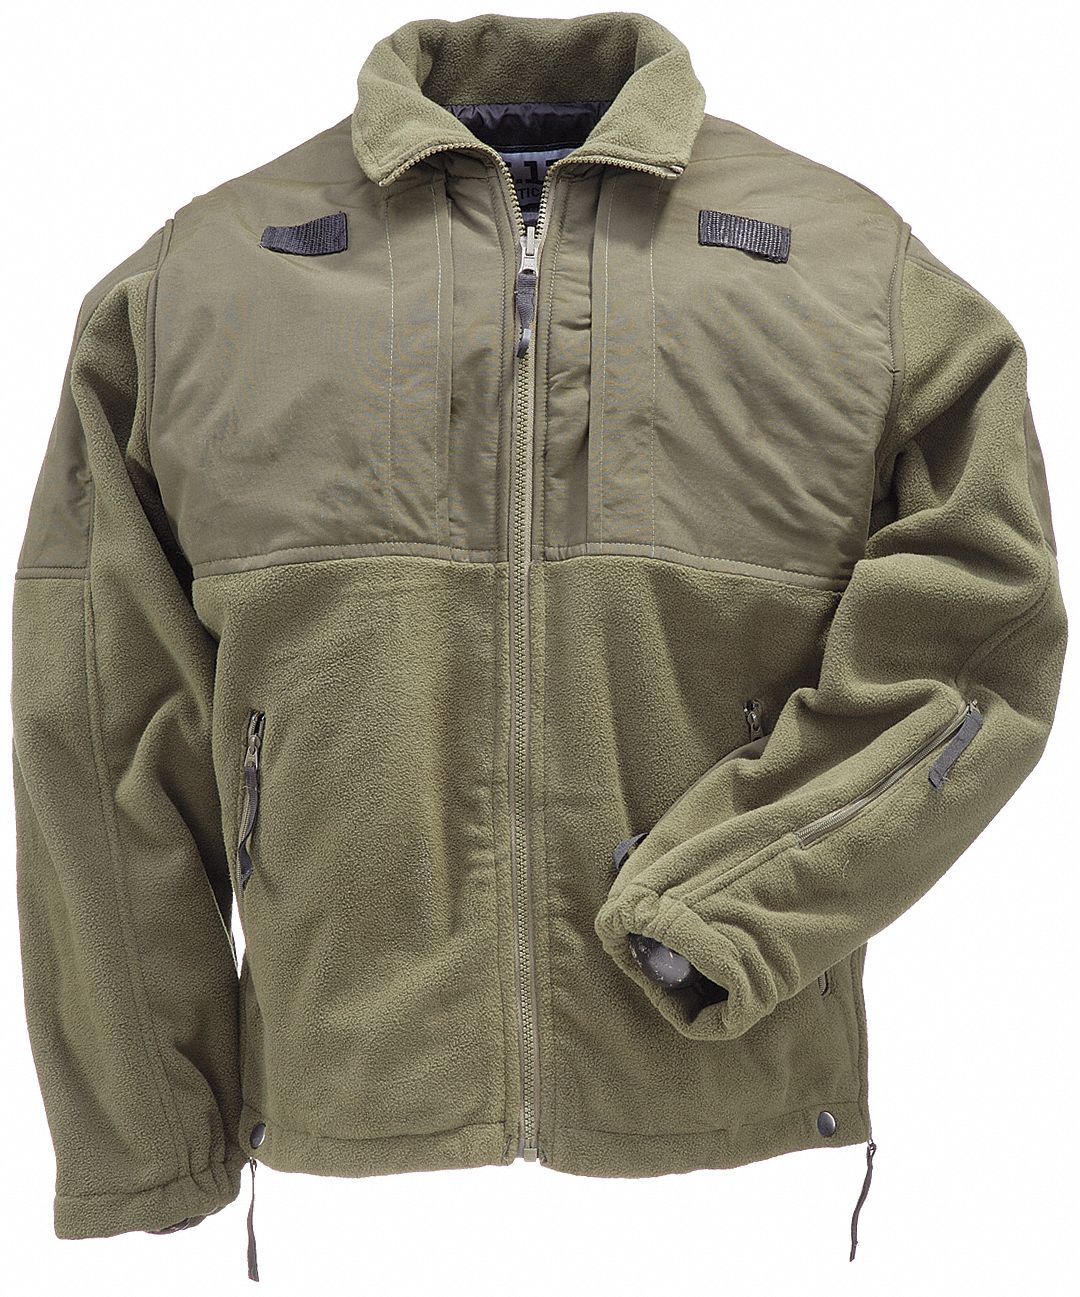 5.11 TACTICAL Tactical Fleece Jacket, Size 4XL, Color: Sheriff Green   Police and EMT Jackets and Parkas   6UWC7|48038